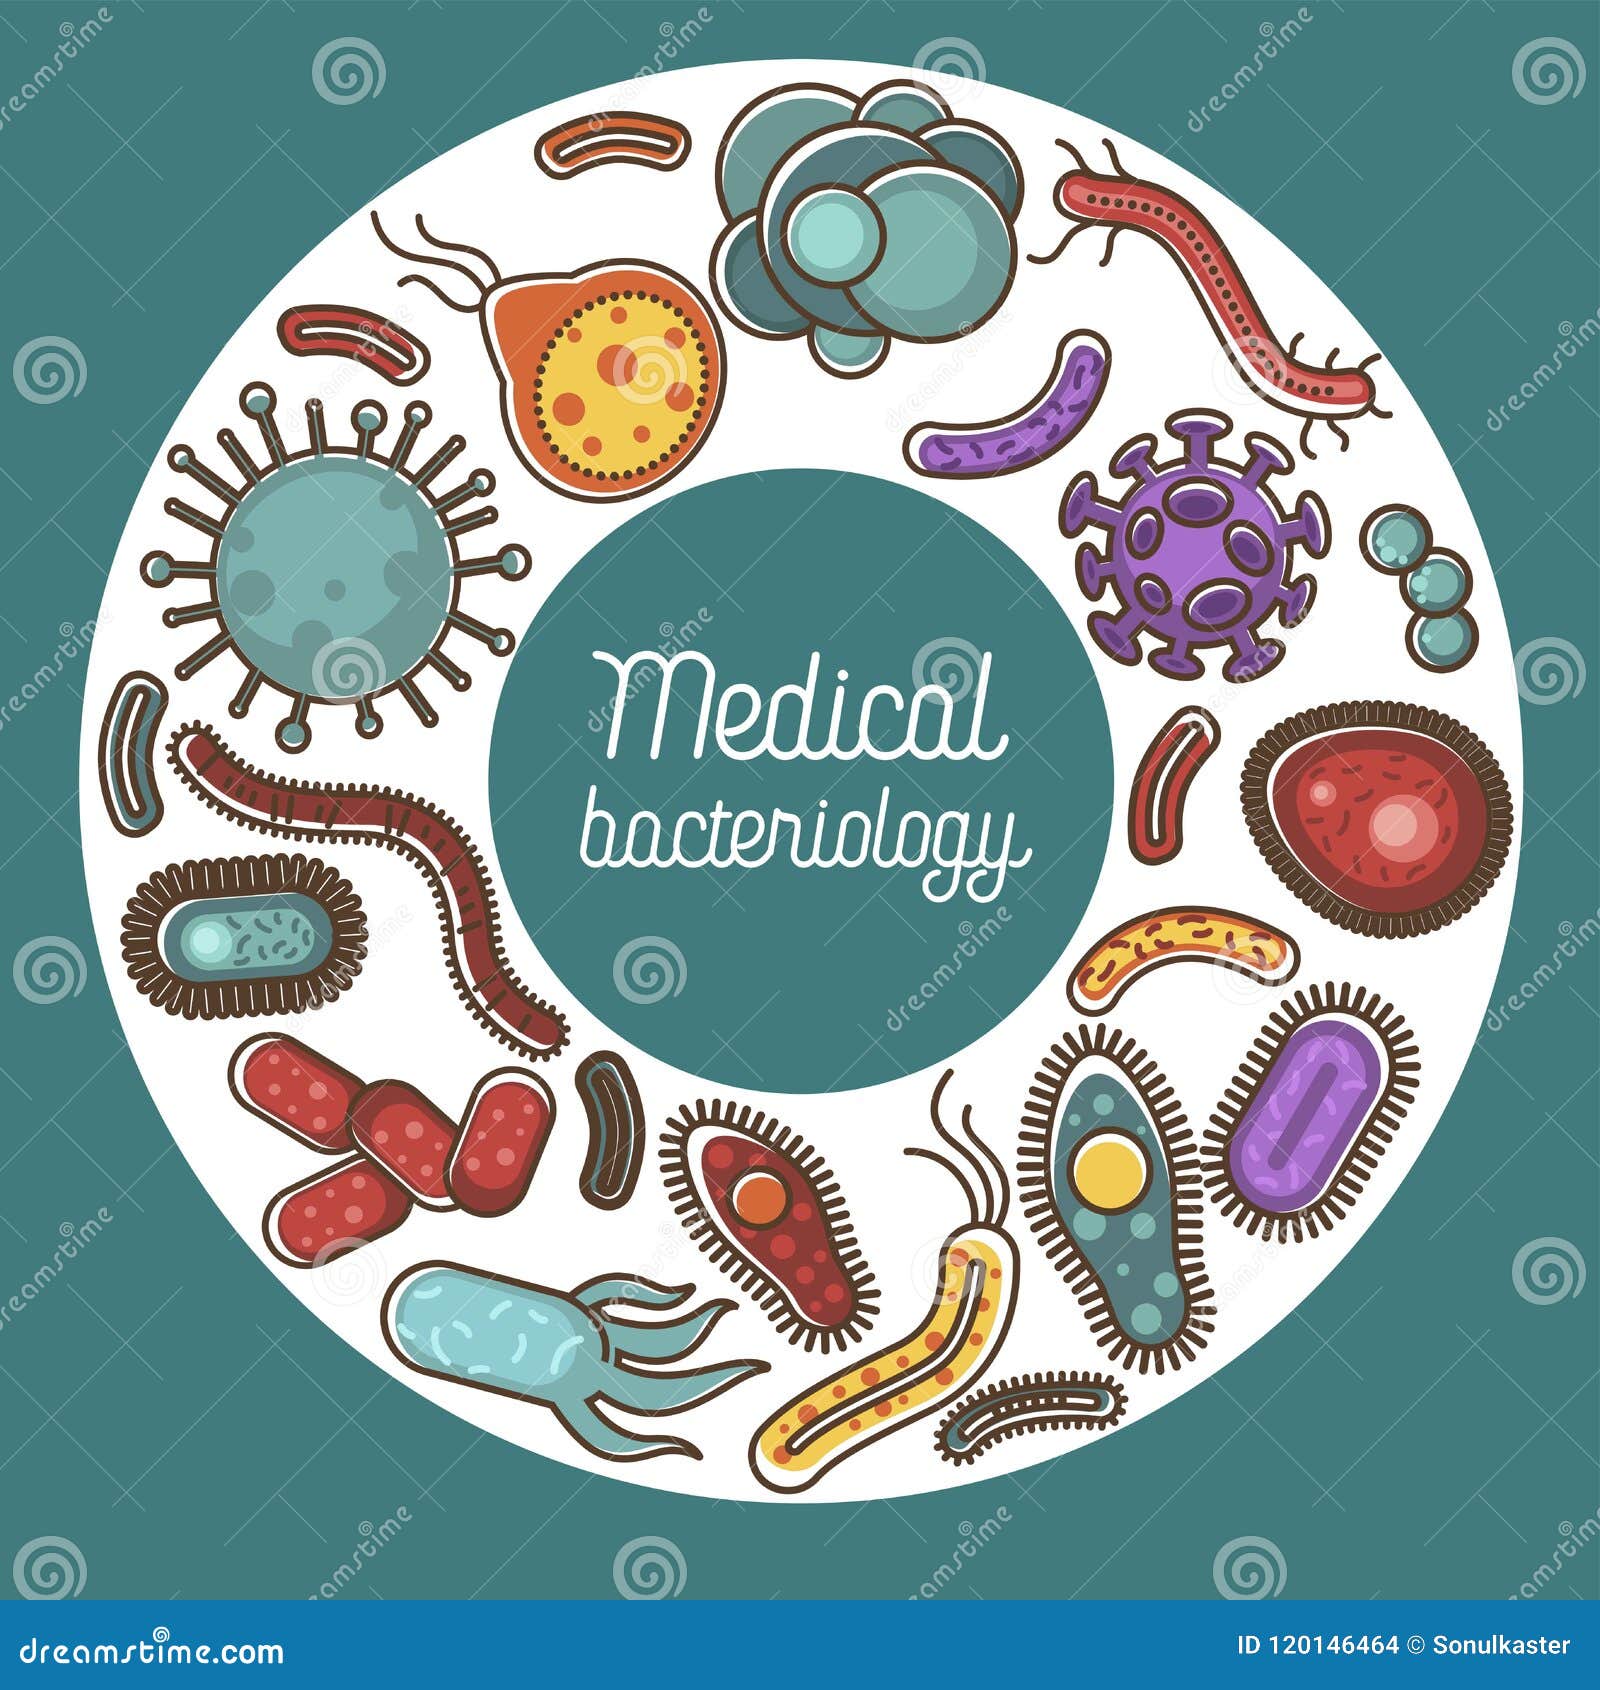 medical bacteriology poster with harmful organisms  